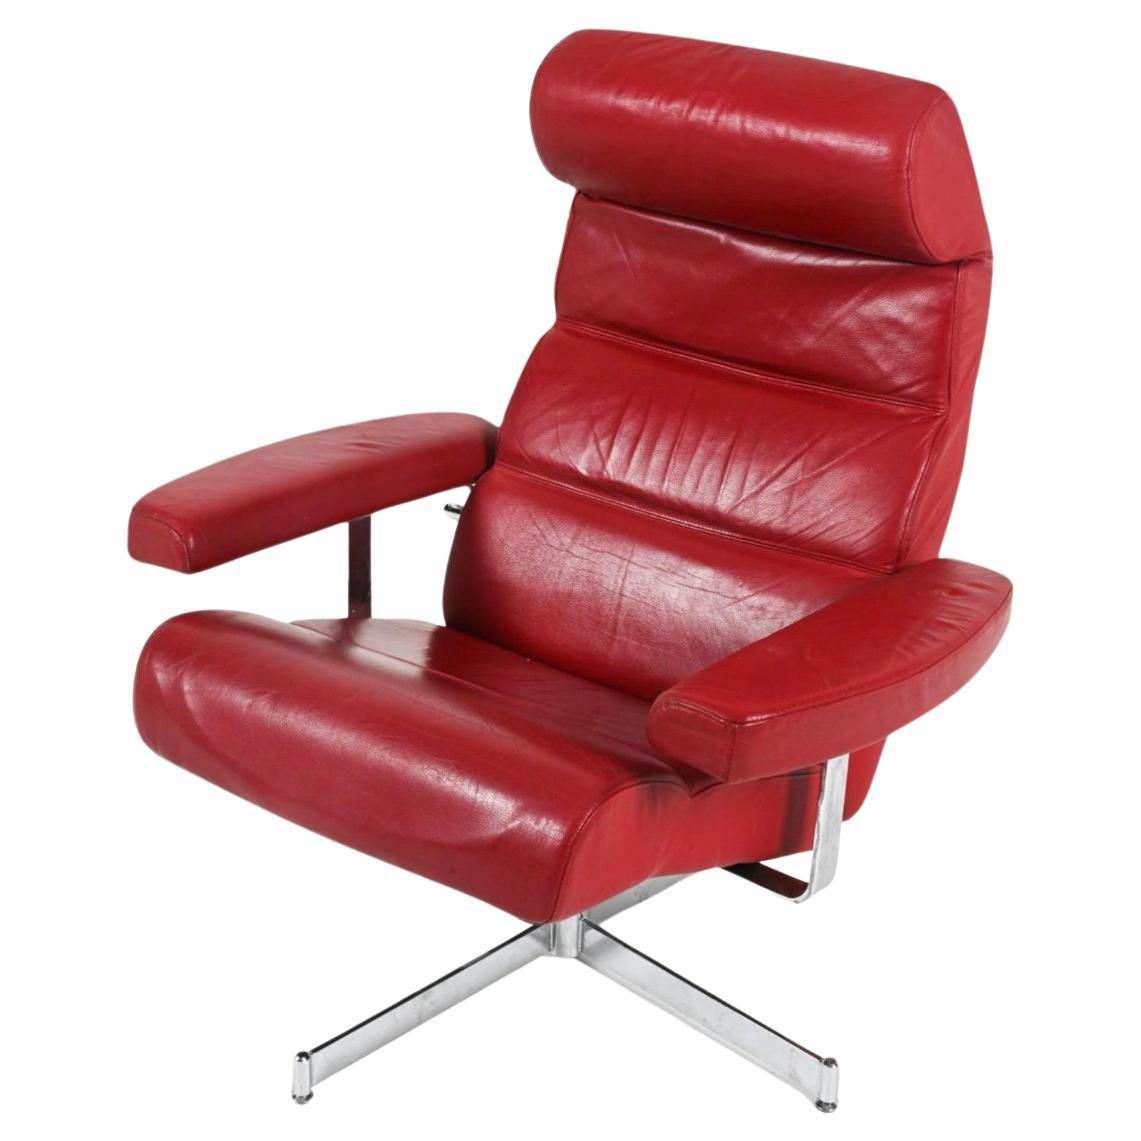 Scandinavian Danish Modern Chrome and Red leather lounge chair. Has bright Red Leather with large arm rests that sit on a chrome swivel base. Chair does have a reclining handle to recline. Late 20th Century. Made in Denmark. Located in Brooklyn